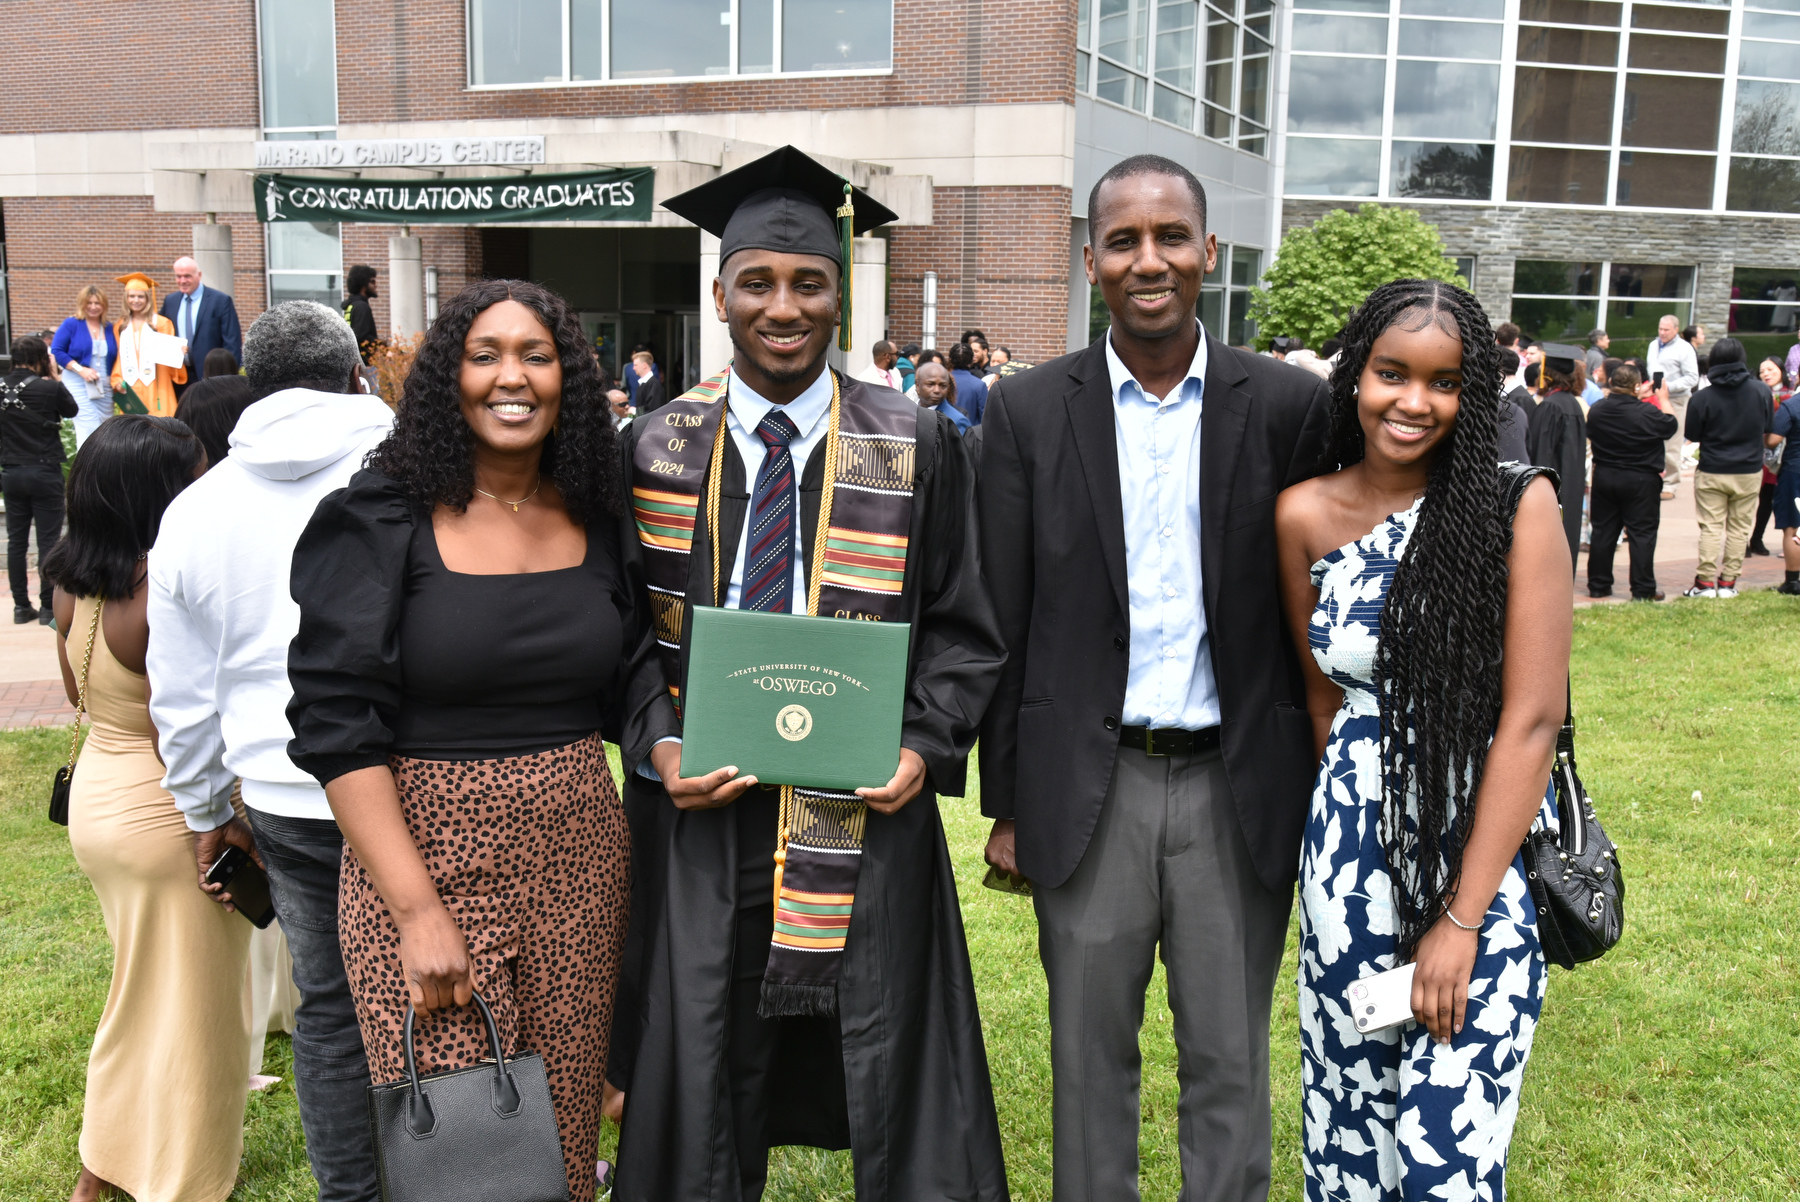 Graduates and their families celebrate after the School of Business ceremony.